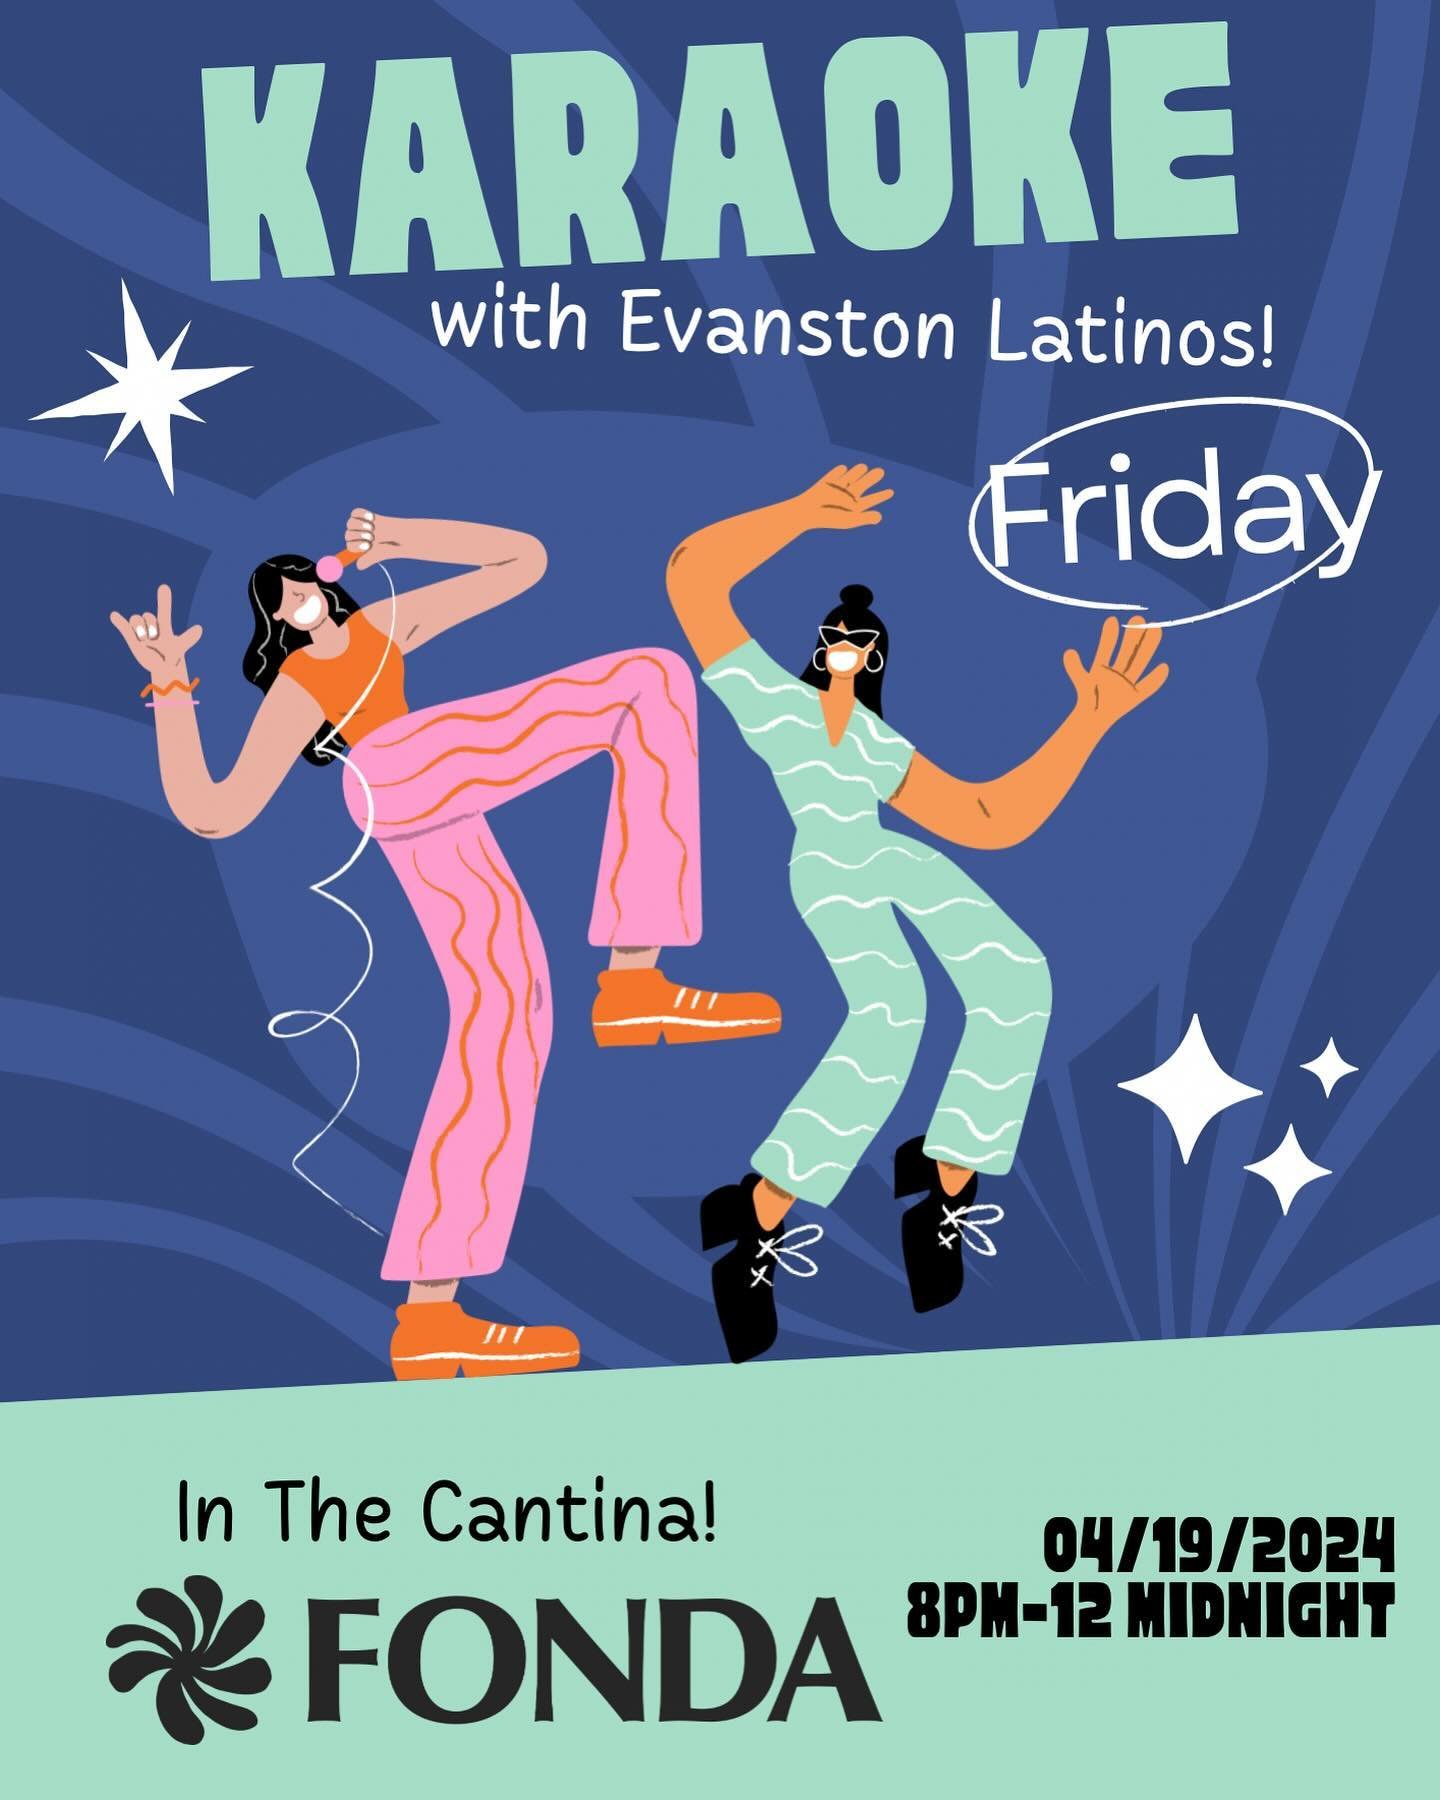 Karaoke is back!!!! This Friday we are partnering with @evanstonlatinos to bring a night of singing, cocktails, delicious food, and fun! 8pm to midnight!!! #latenightsatfonda #fondaevanston #fondacantina